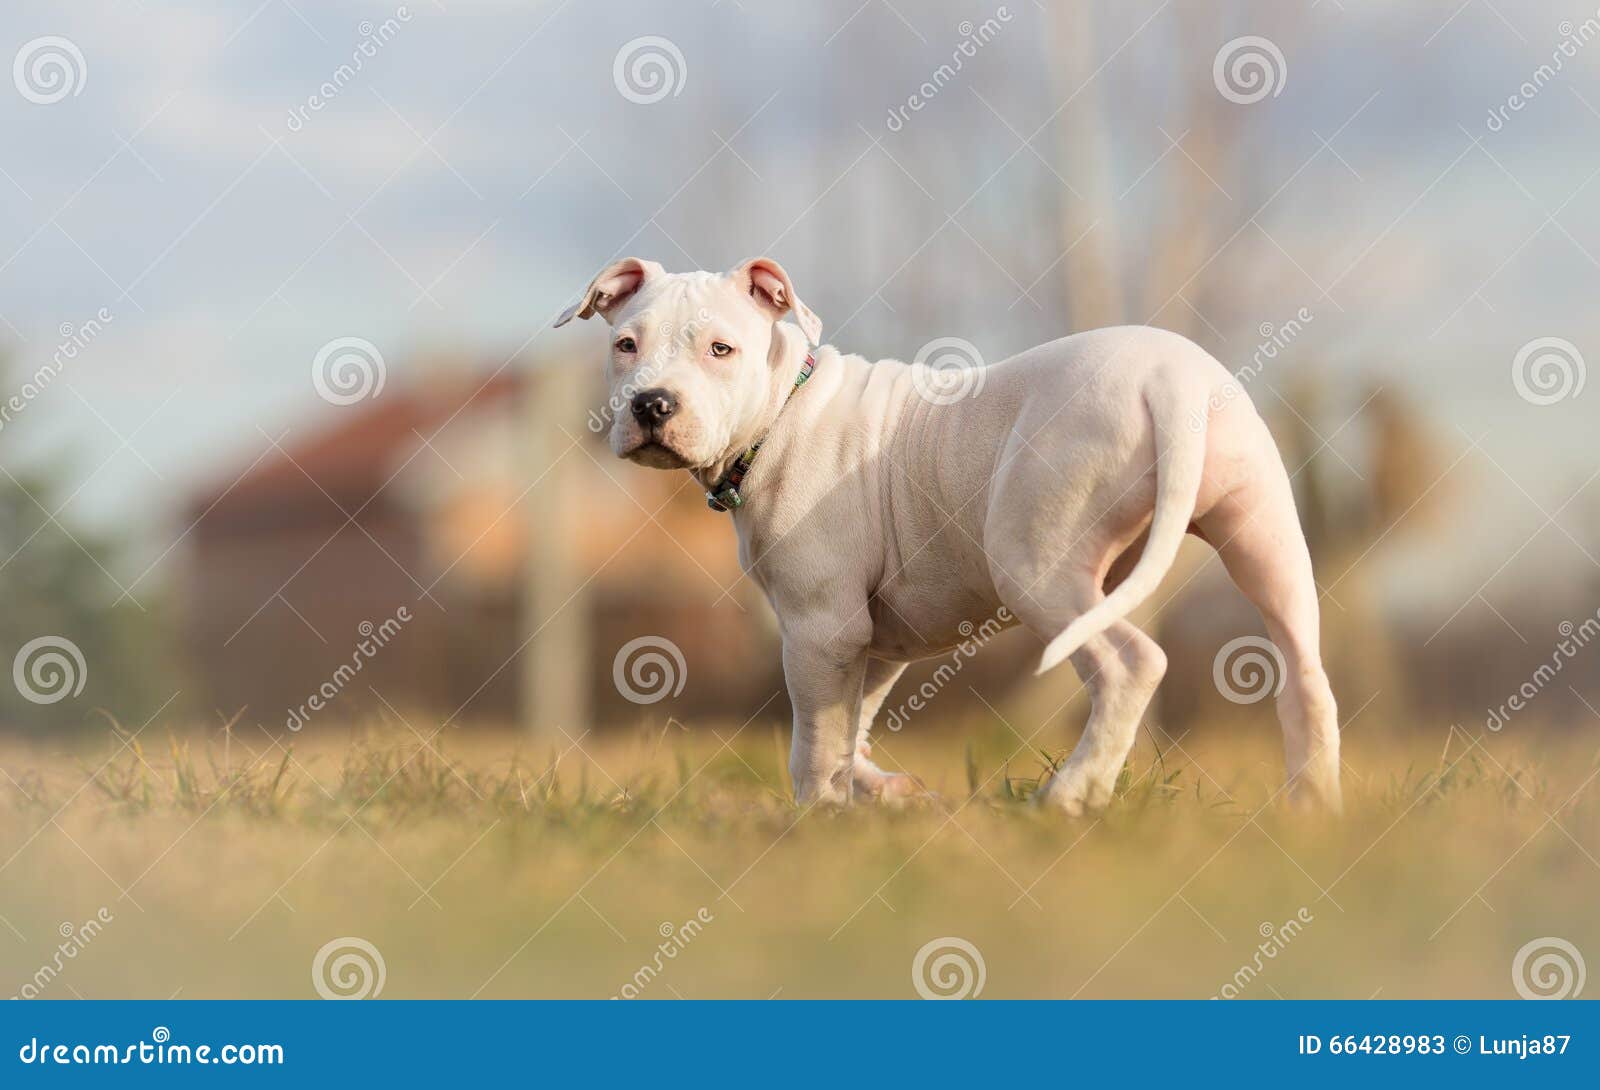 completely white american staffordshire terrier